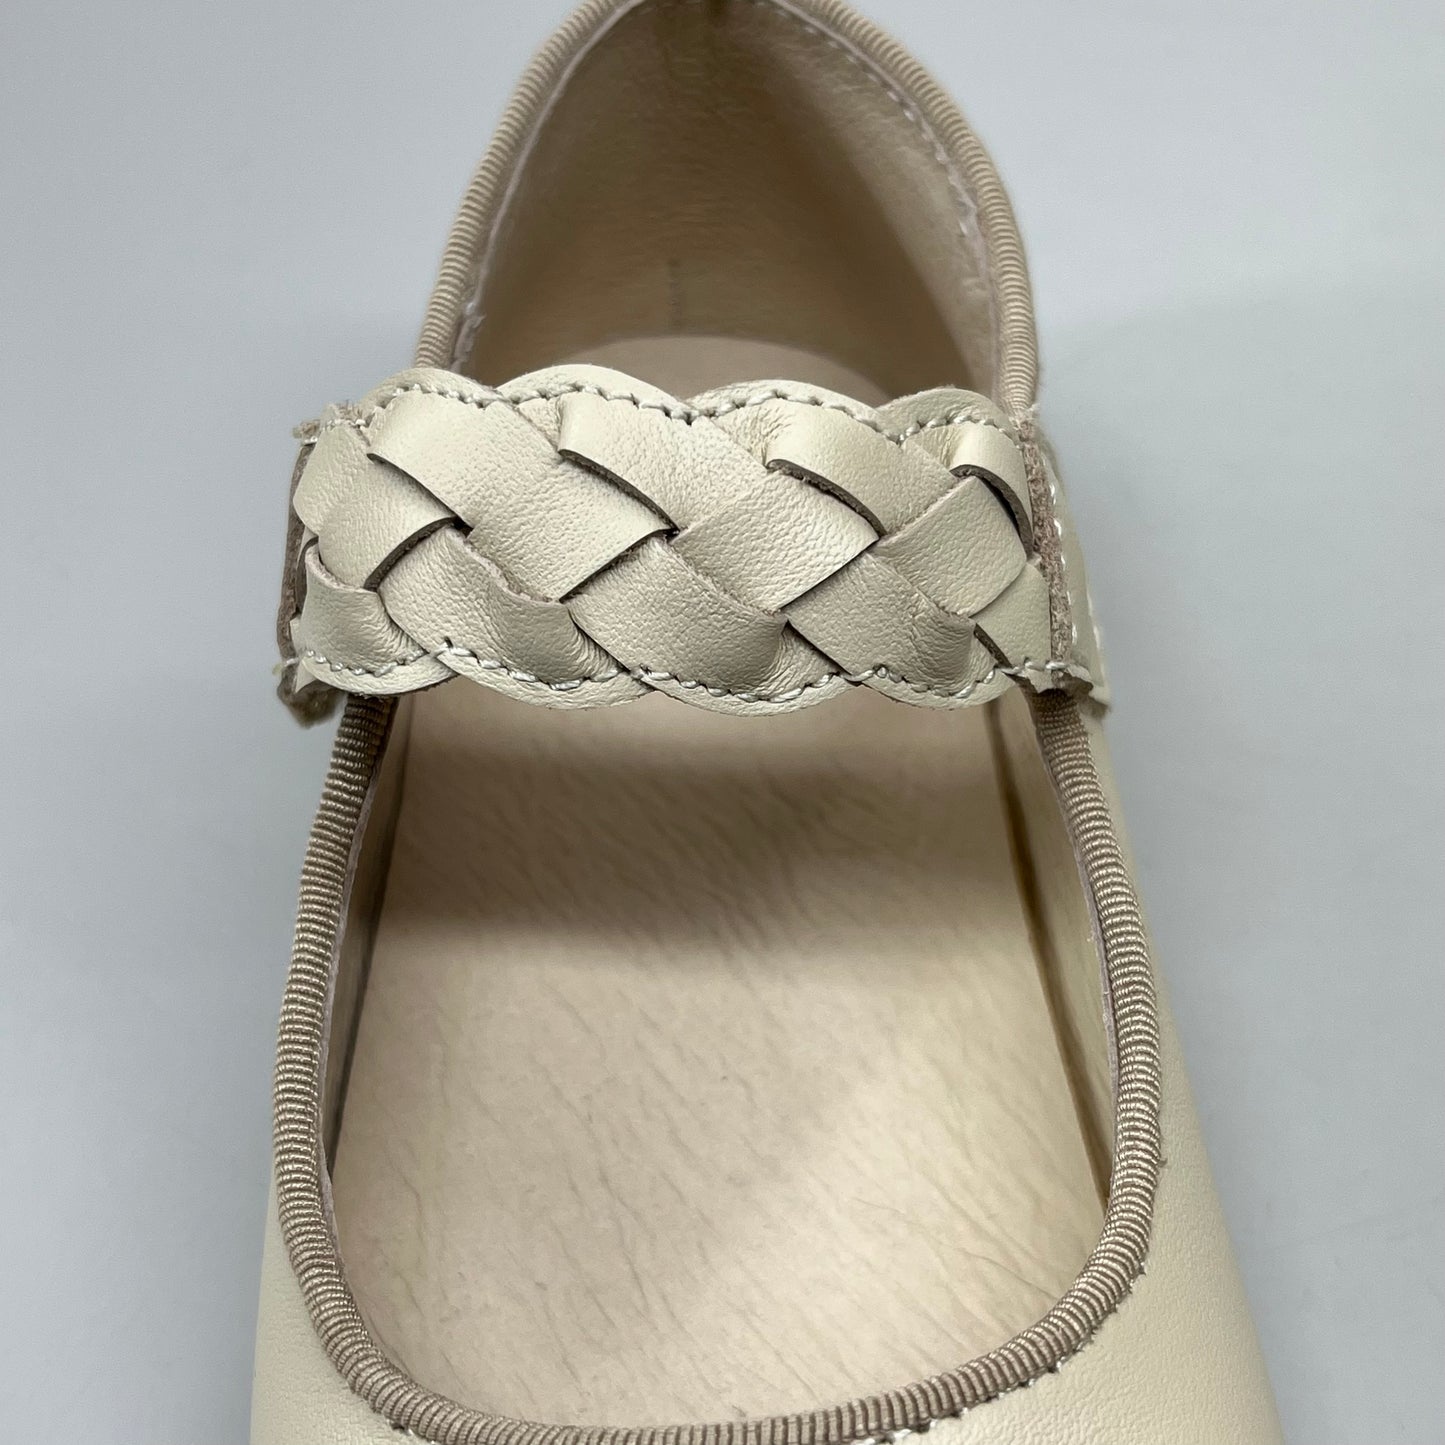 OLD SOLES Lady Plat Braided Strap Leather Shoe Kid’s Sz 29 US 12 Cream #817